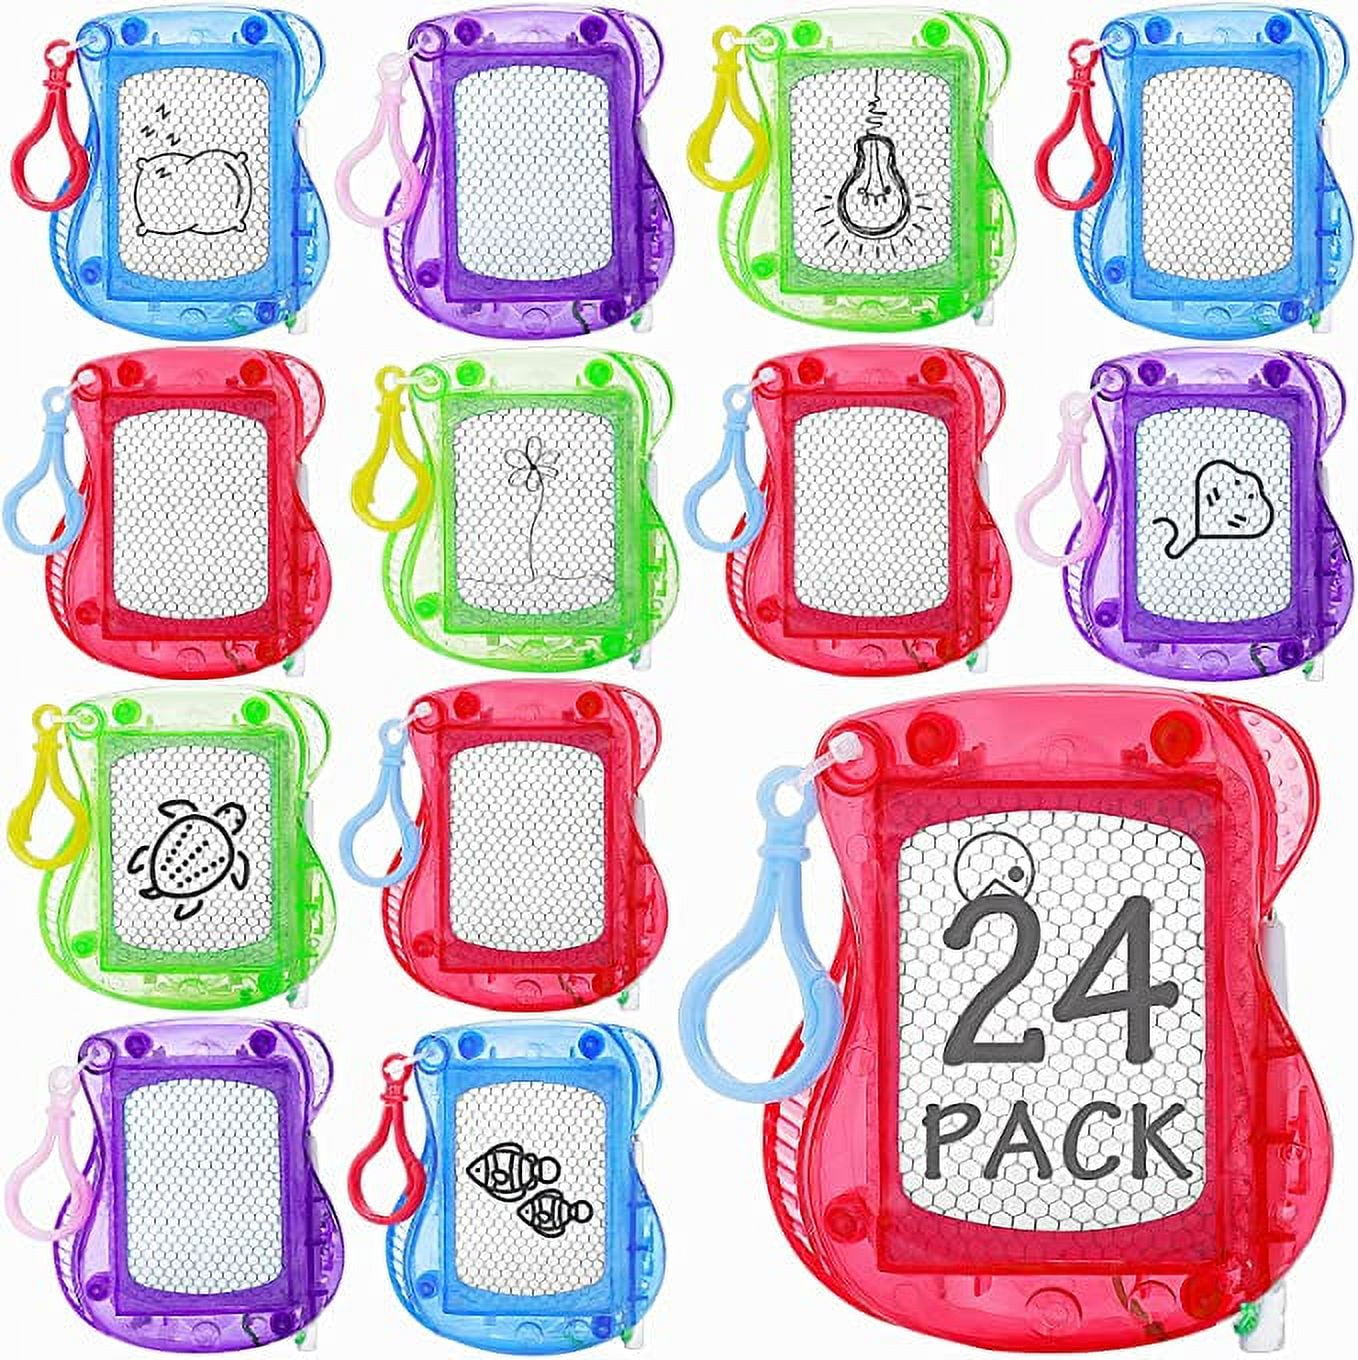 GEKMOR Mini Drawing Board, 20 Pcs Small Magnetic Doodle Board for Kids, Portable Backpack Keychain Doddle Board with Pen, Kid Sketch Erasable Small